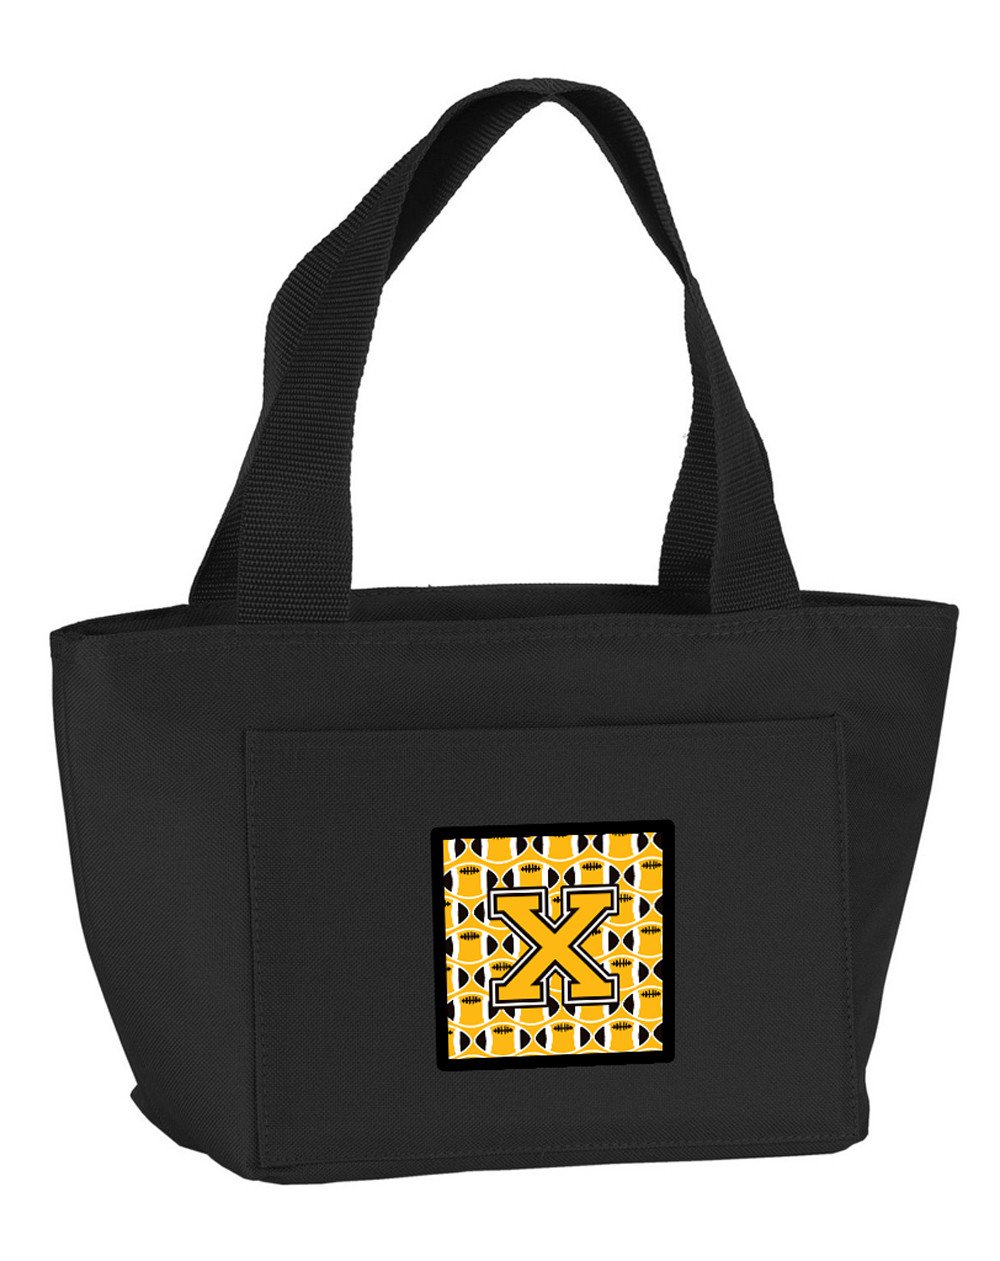 Letter X Football Black, Old Gold and White Lunch Bag CJ1080-XBK-8808 by Caroline's Treasures